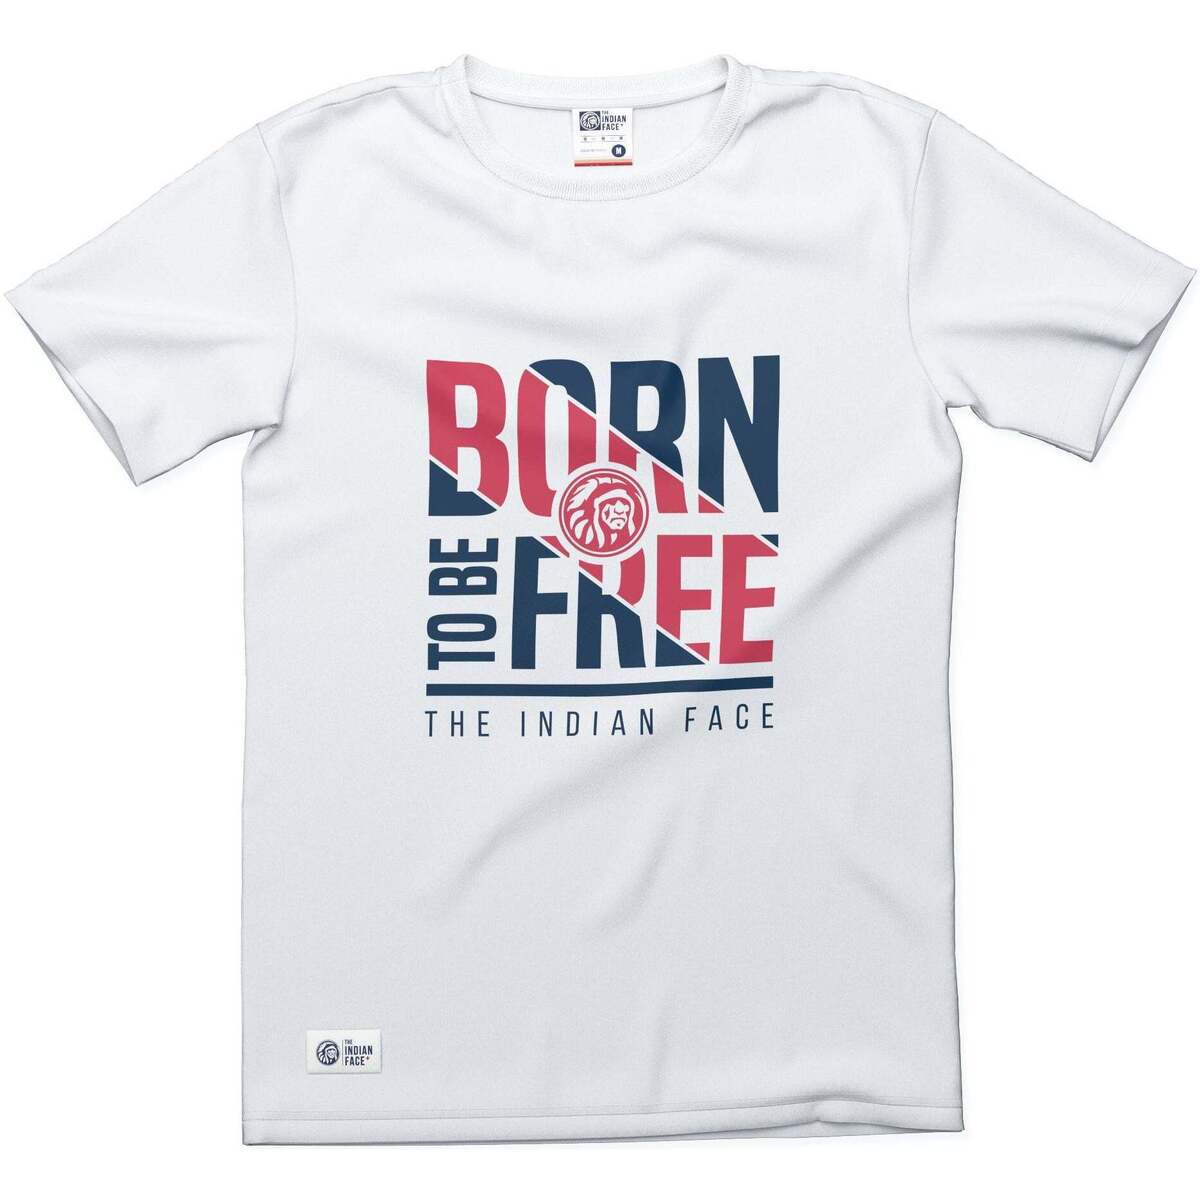 Vêtements T-shirts manches courtes The Indian Face Born to be Free Blanc